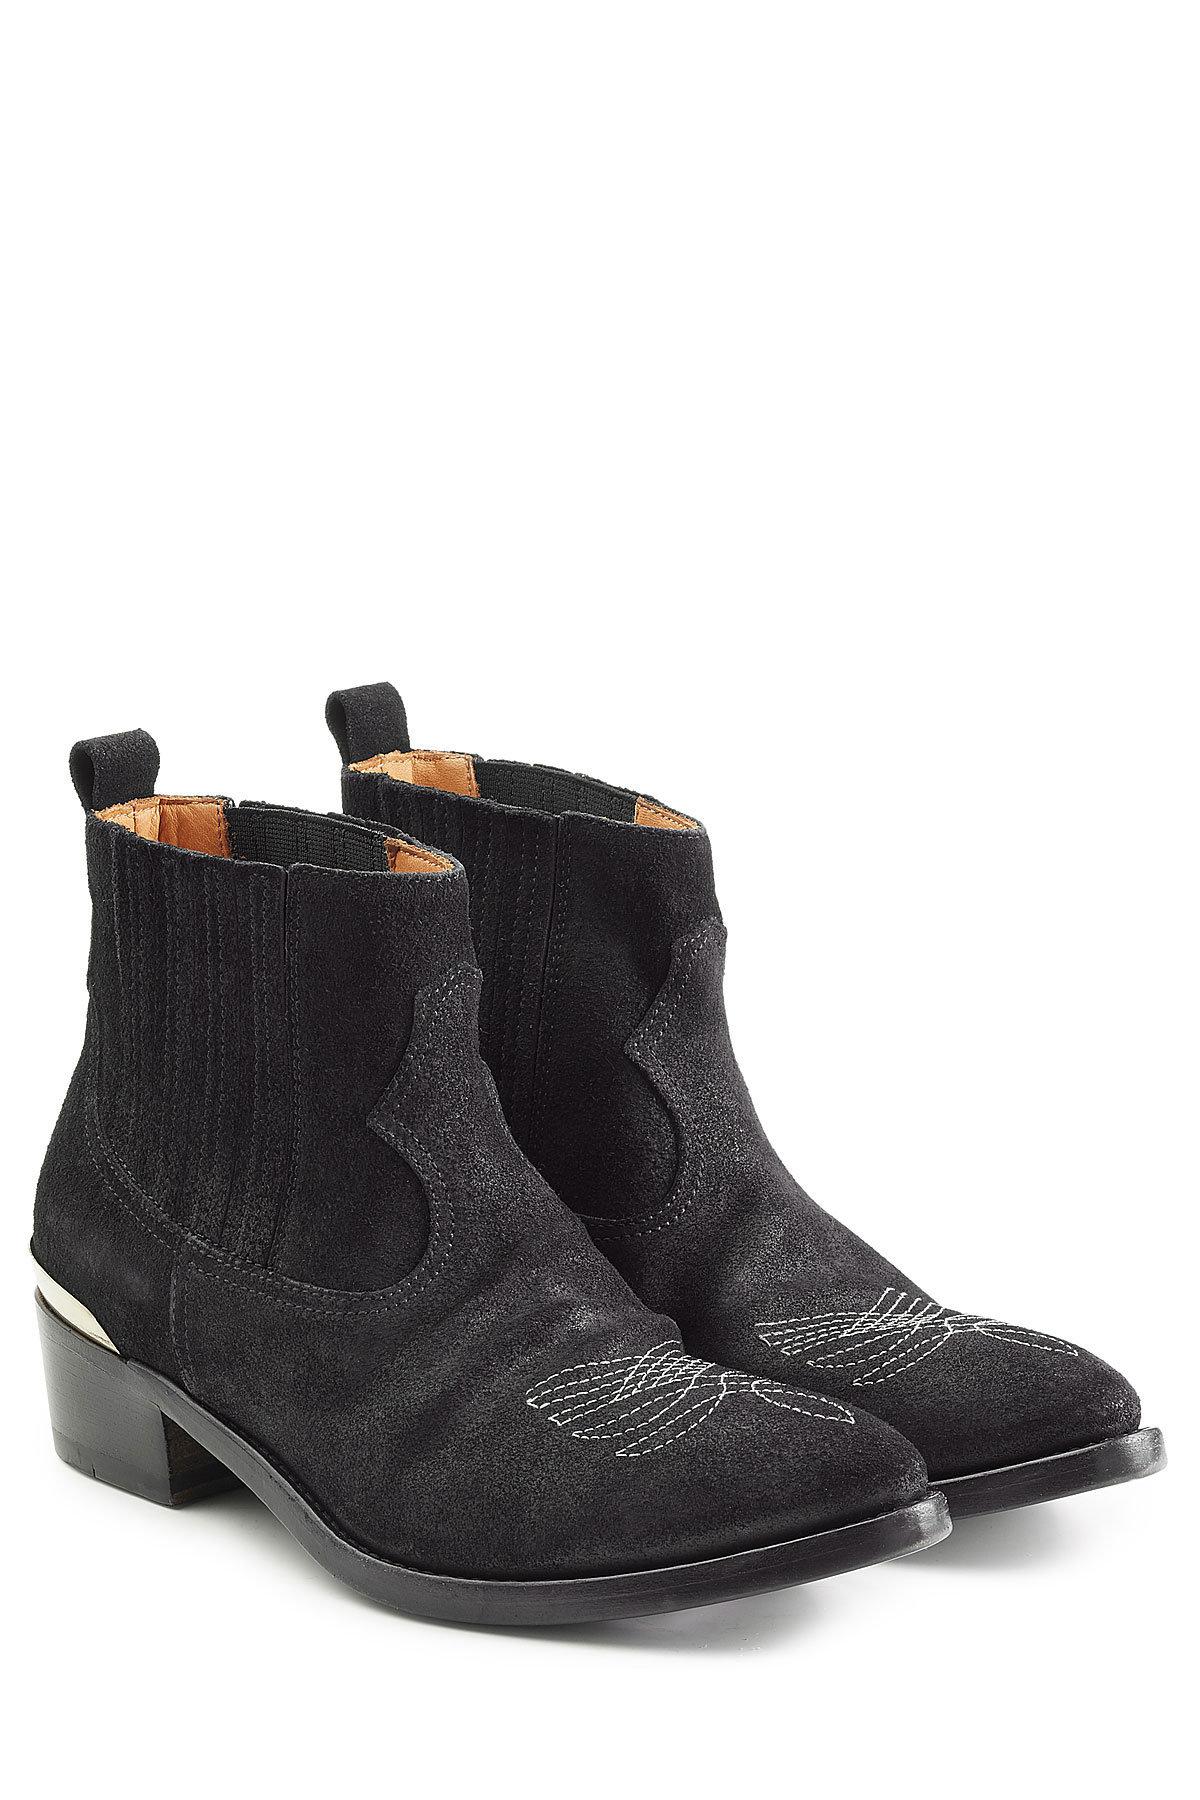 Lyst - Golden Goose Deluxe Brand Cowboy Suede Ankle Boots in Black